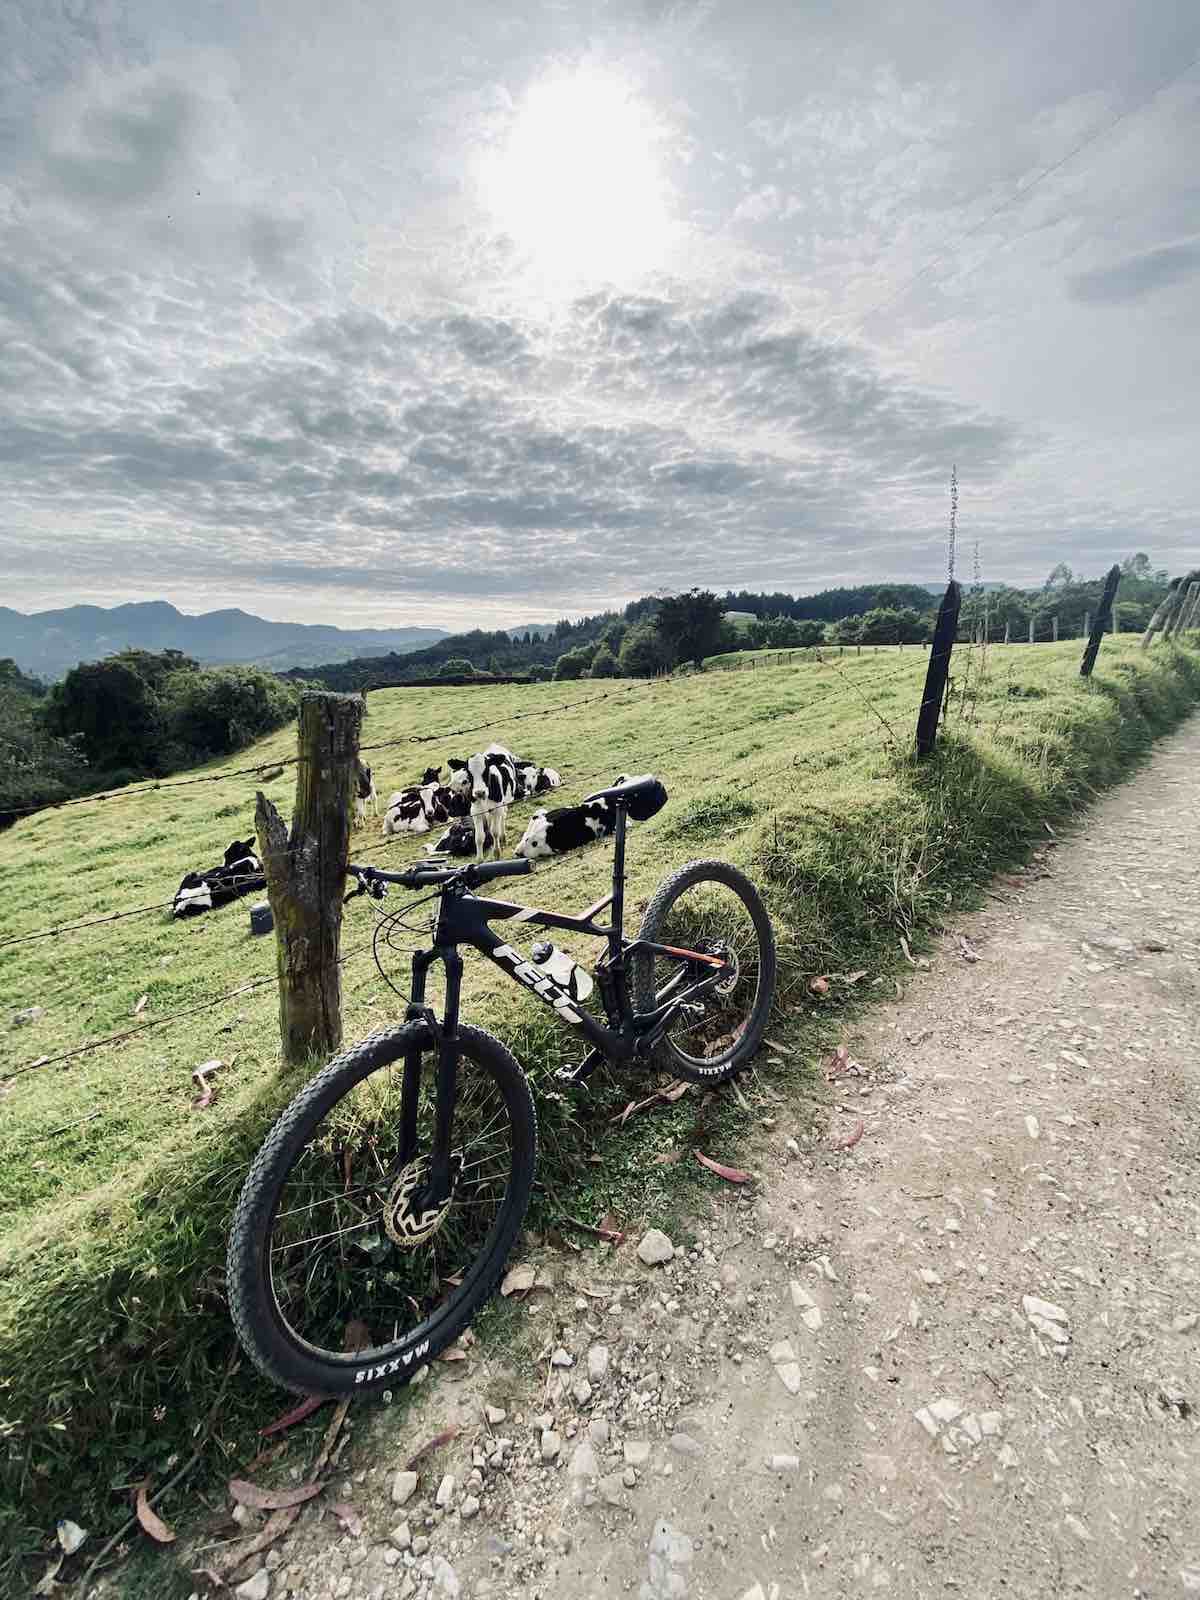 bikerumor pic of the day felt mountain bike leaning up against wire fence on a gravel road next to lush green field with cows in the background in bogota colombia.